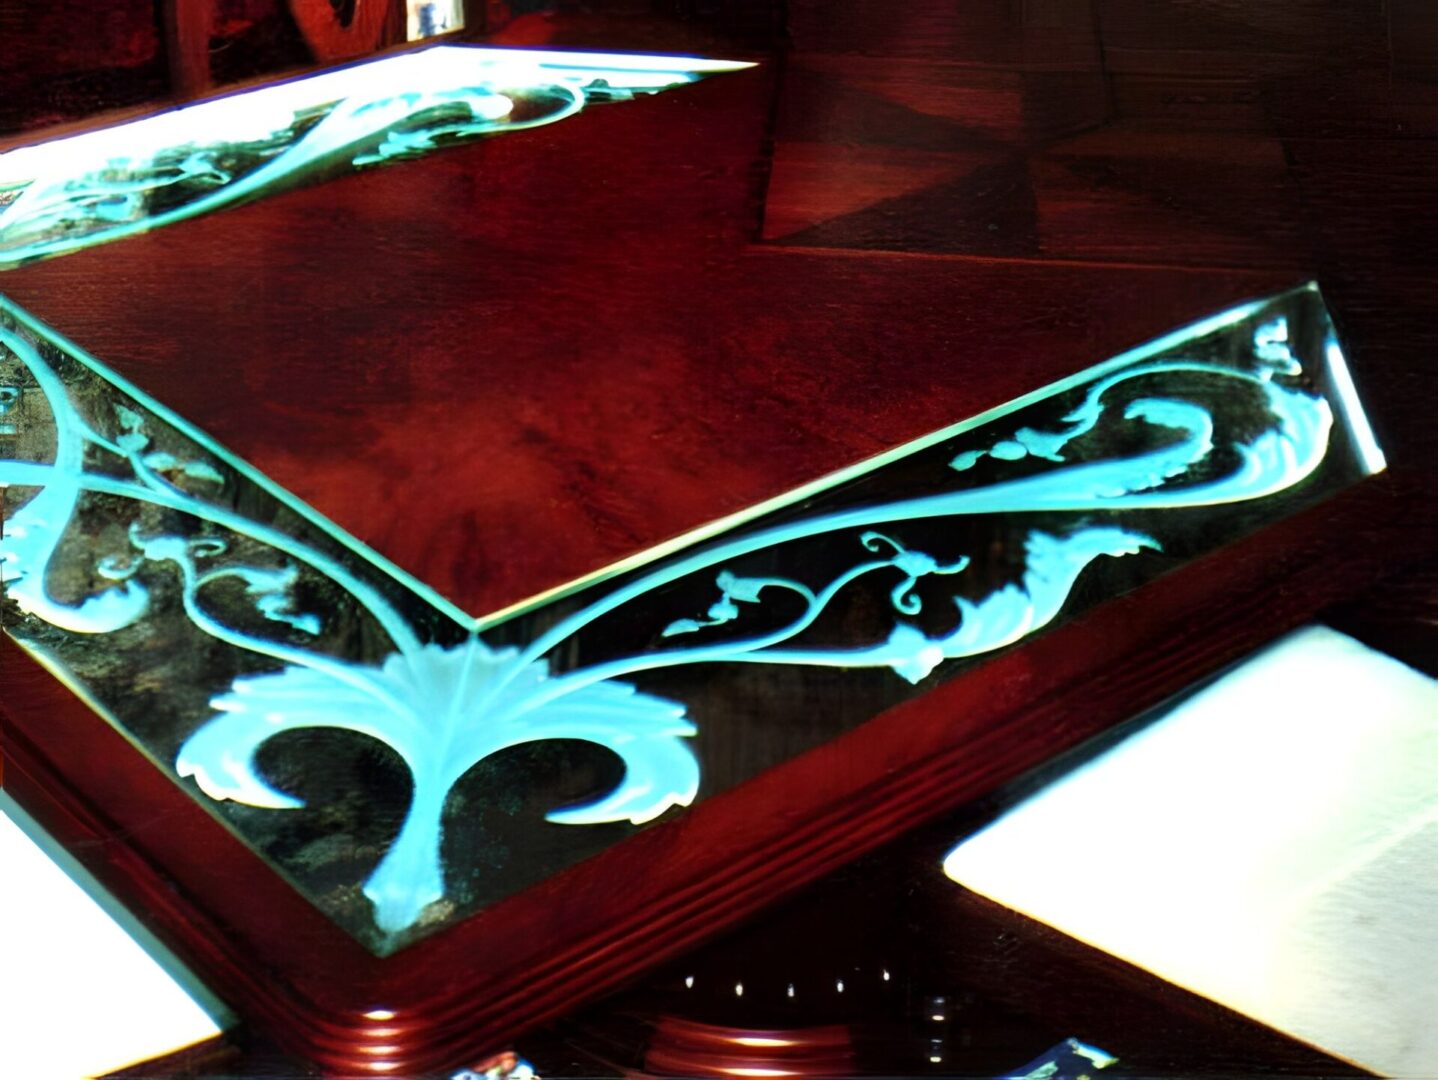 Ornately carved wooden table corner with reflective glass surface and distinct reflections.